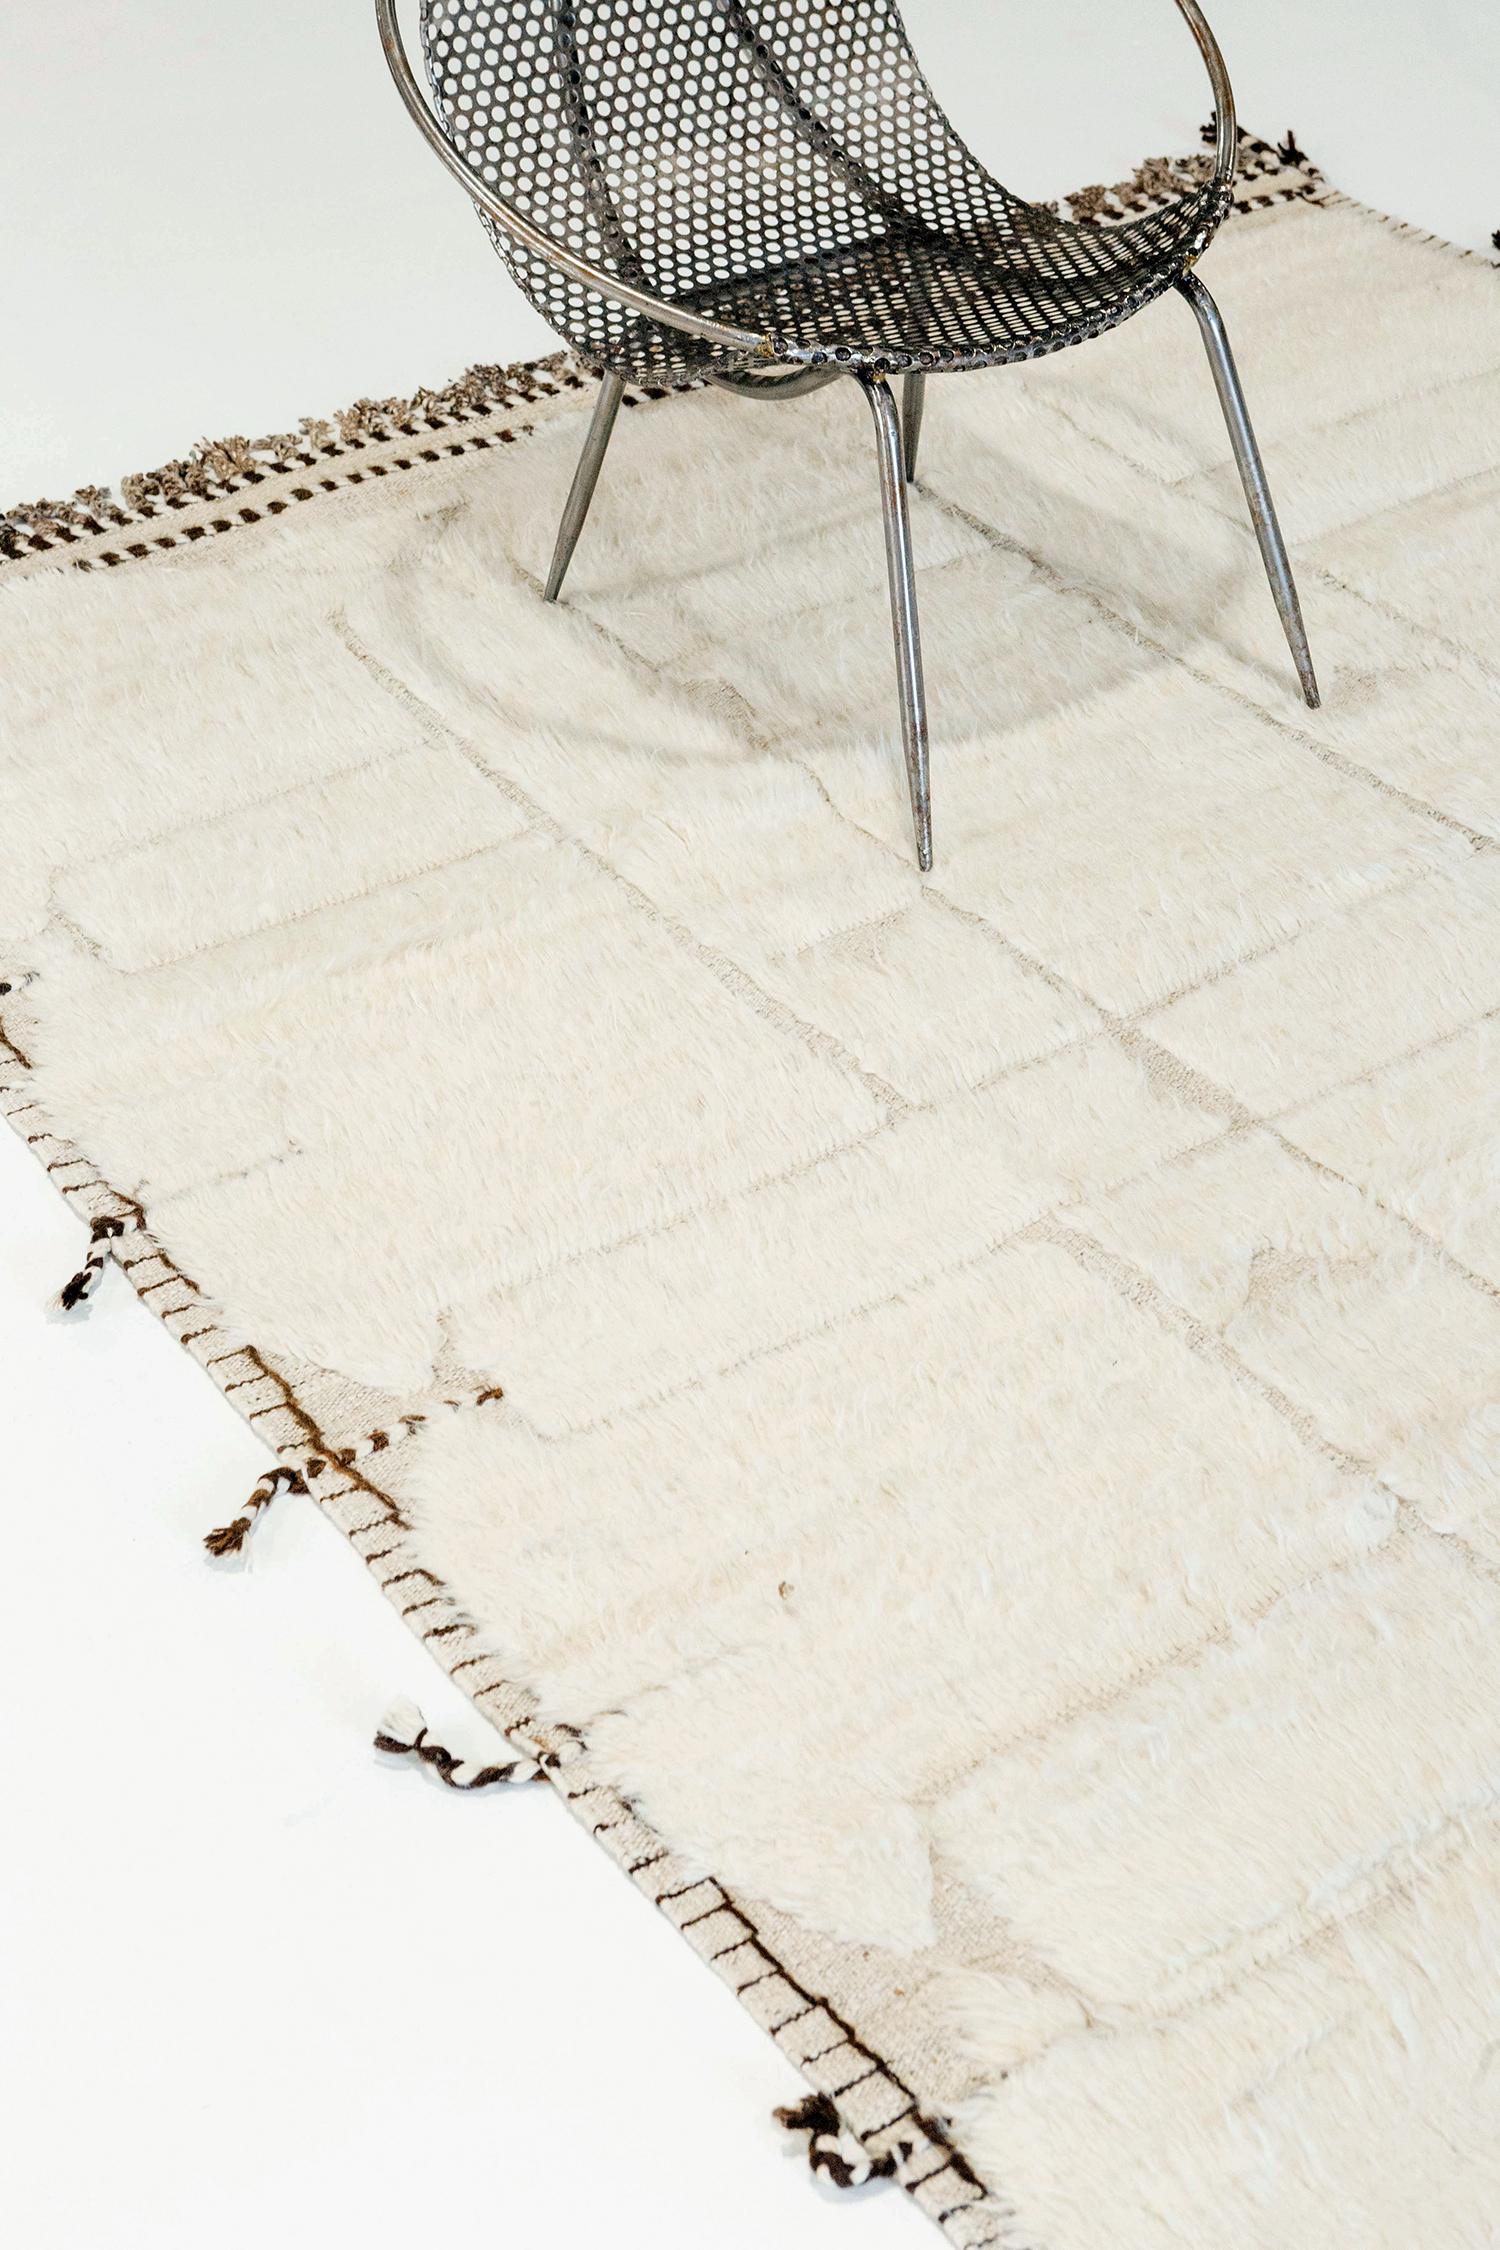 Essaouina' is a beautifully textured rug with embossed designs inspired from the Atlas Mountains of Morocco. Surrounded by ivory shag and tasseled borders, Essaouina makes for a great contemporary interpretation for the modern design world.